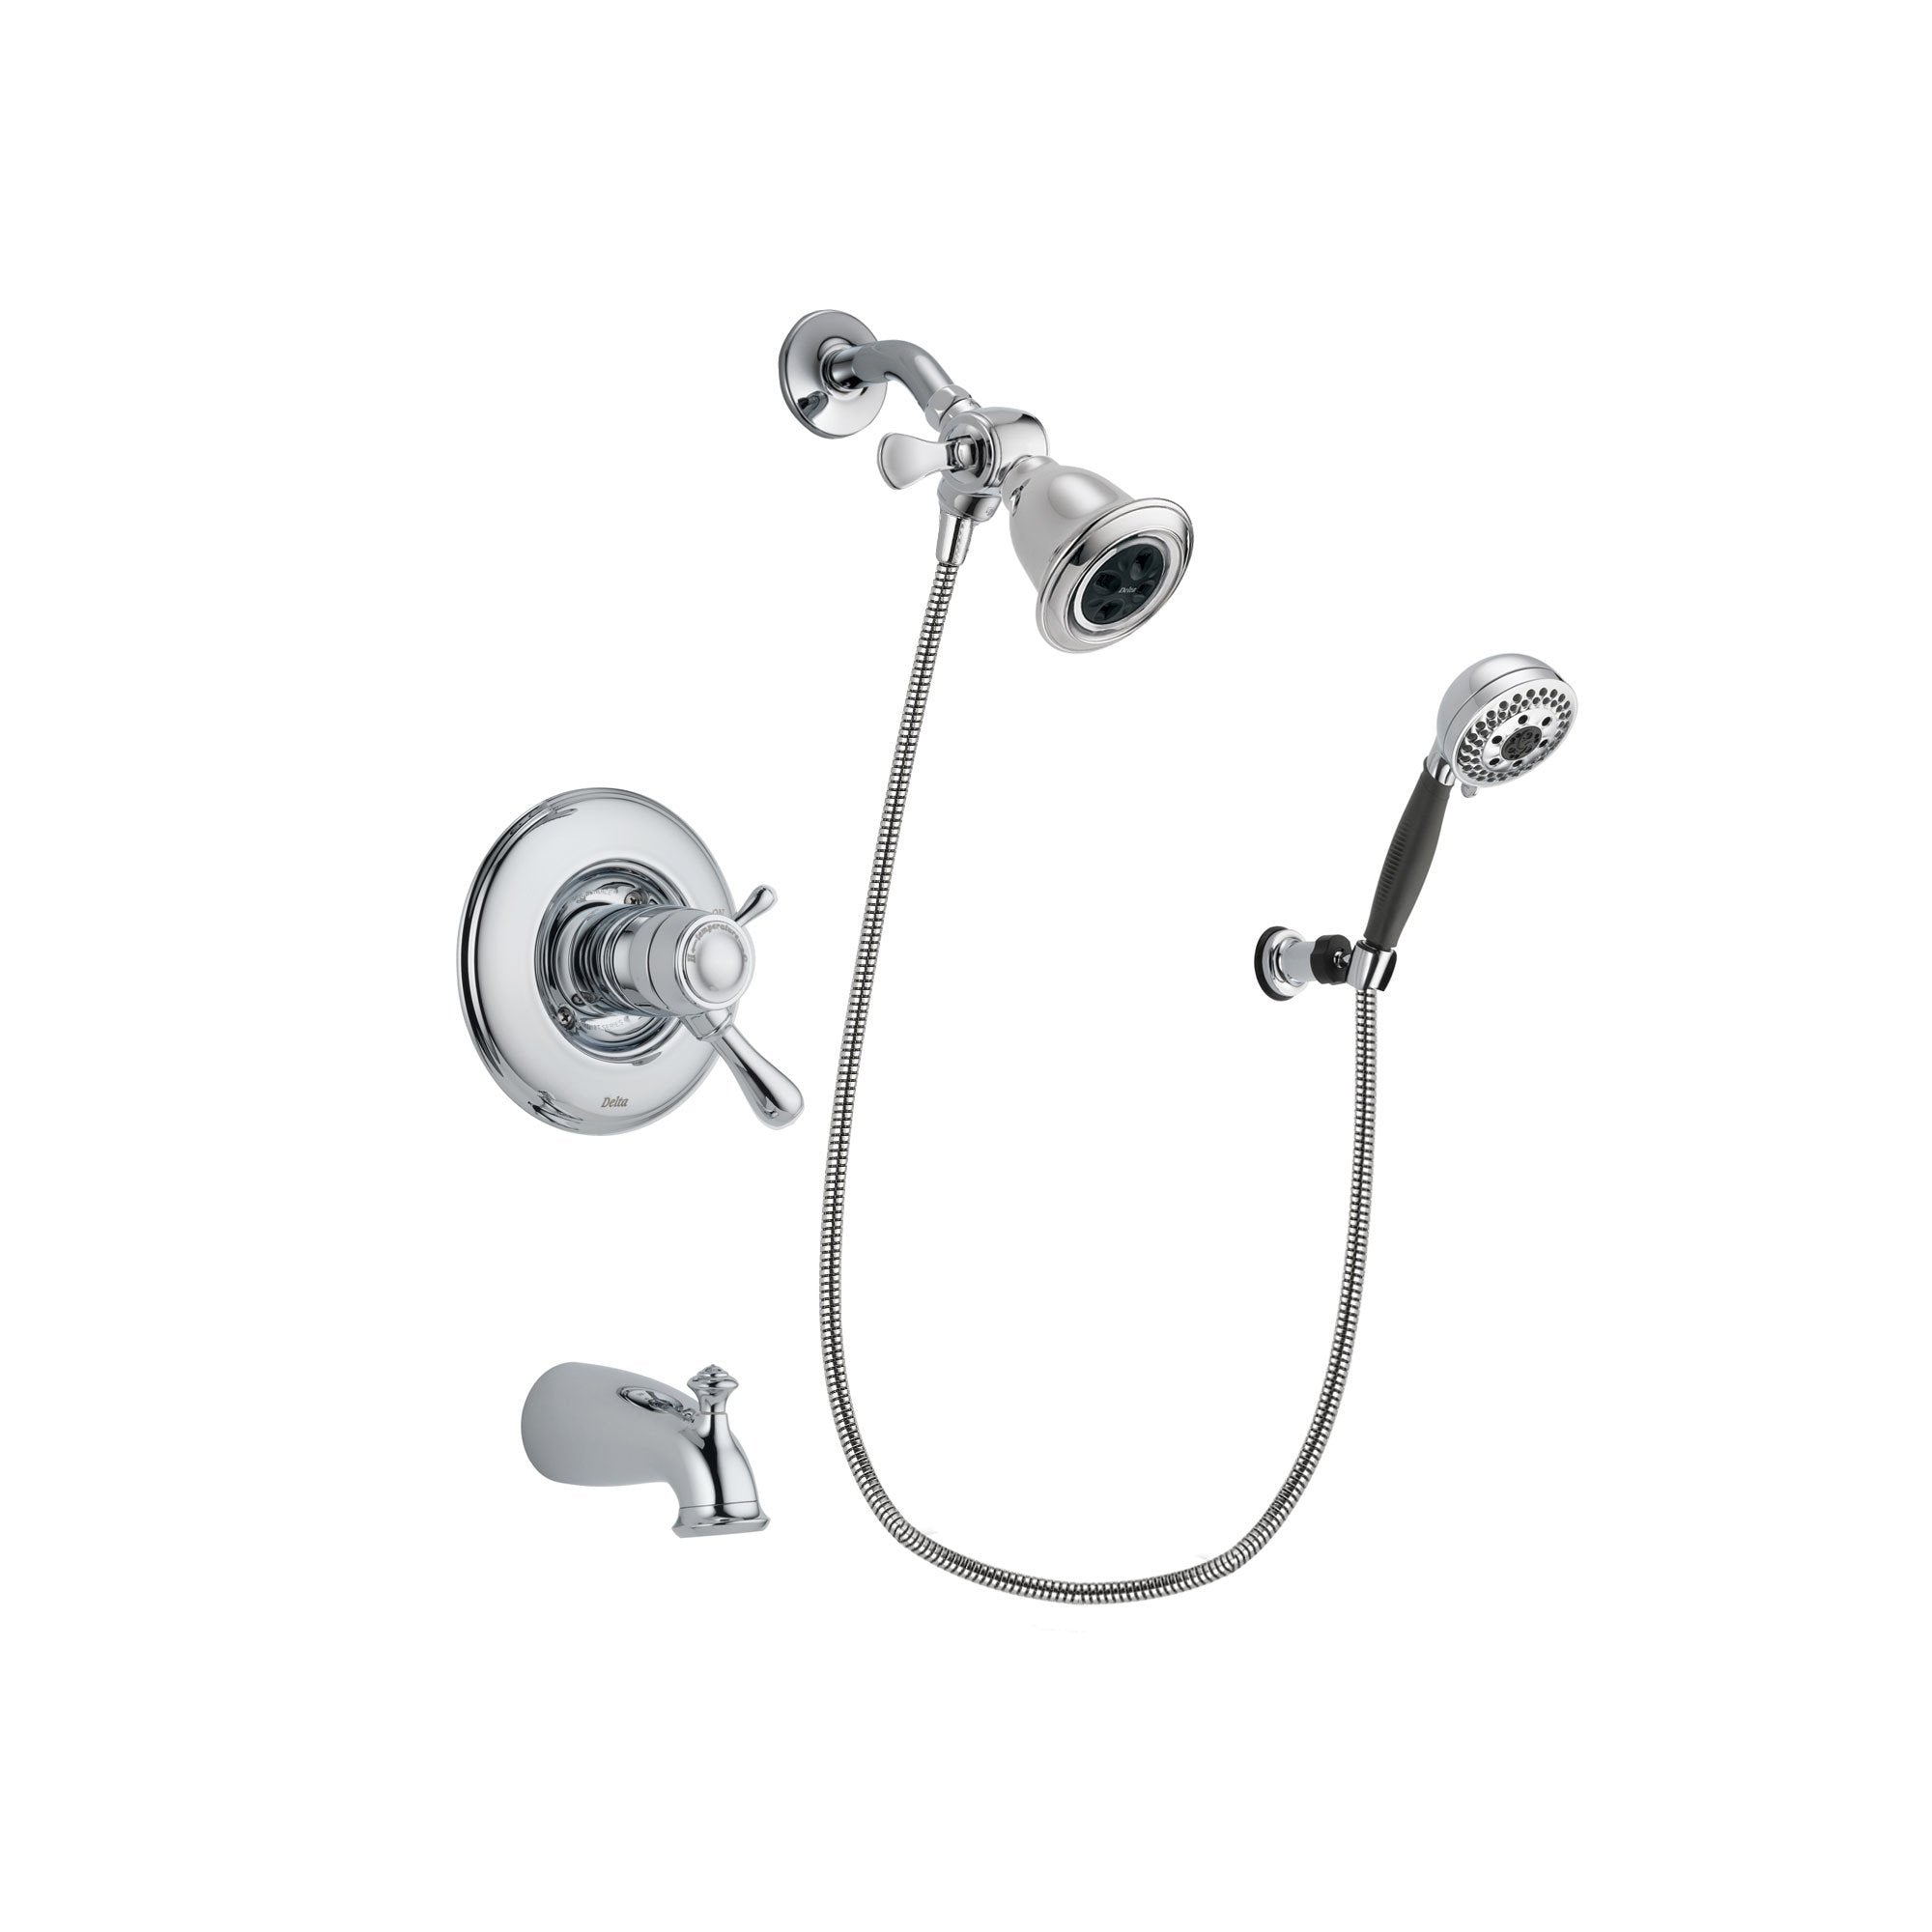 Delta Leland Chrome Finish Thermostatic Tub and Shower Faucet System Package with Water Efficient Showerhead and 5-Spray Modern Handheld Shower with Wall Bracket and Hose Includes Rough-in Valve and Tub Spout DSP1143V